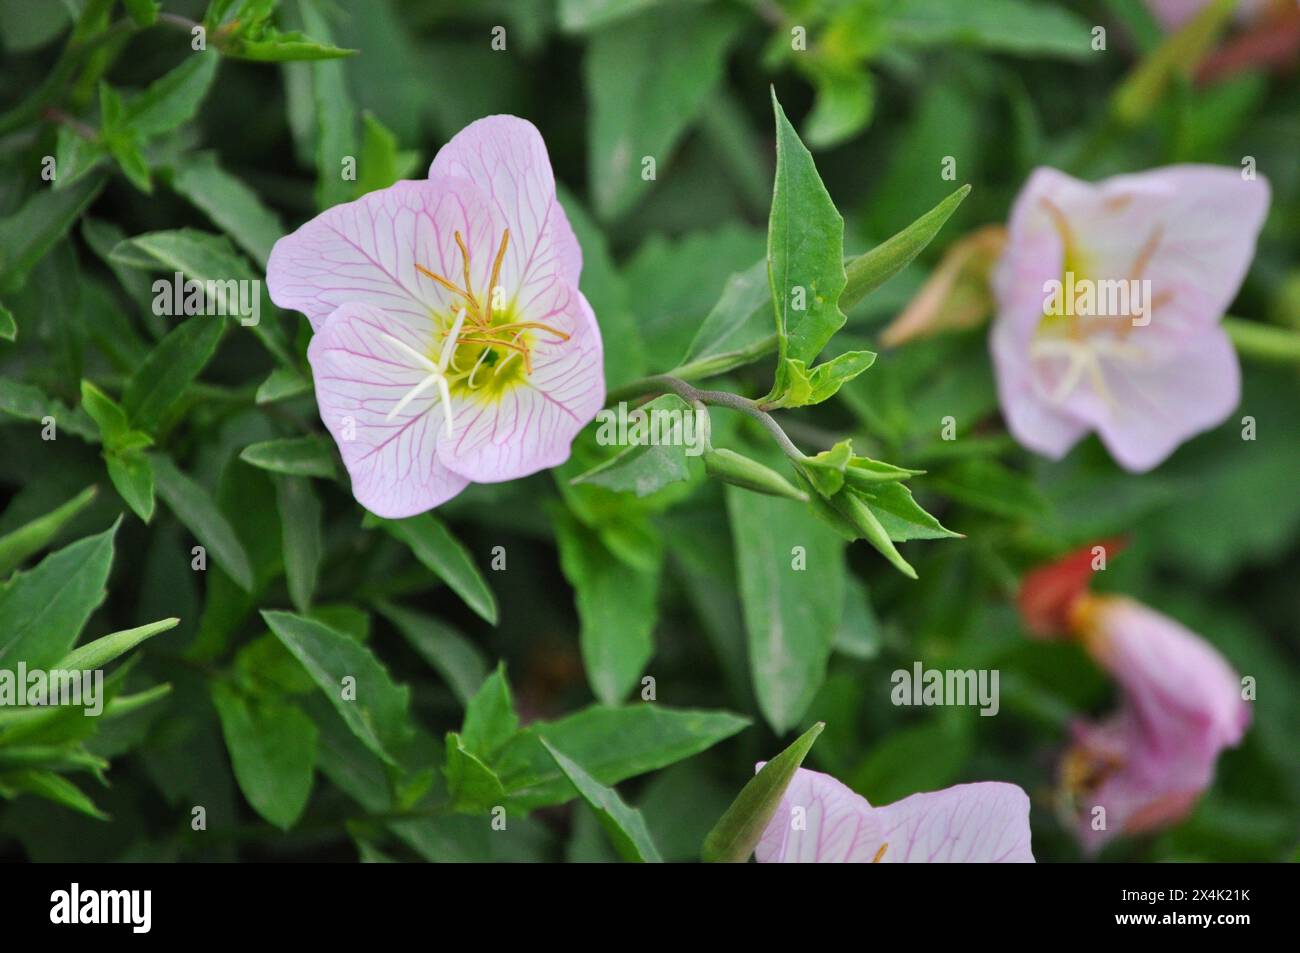 Oenothera speciosa, flowers between may and october Stock Photo